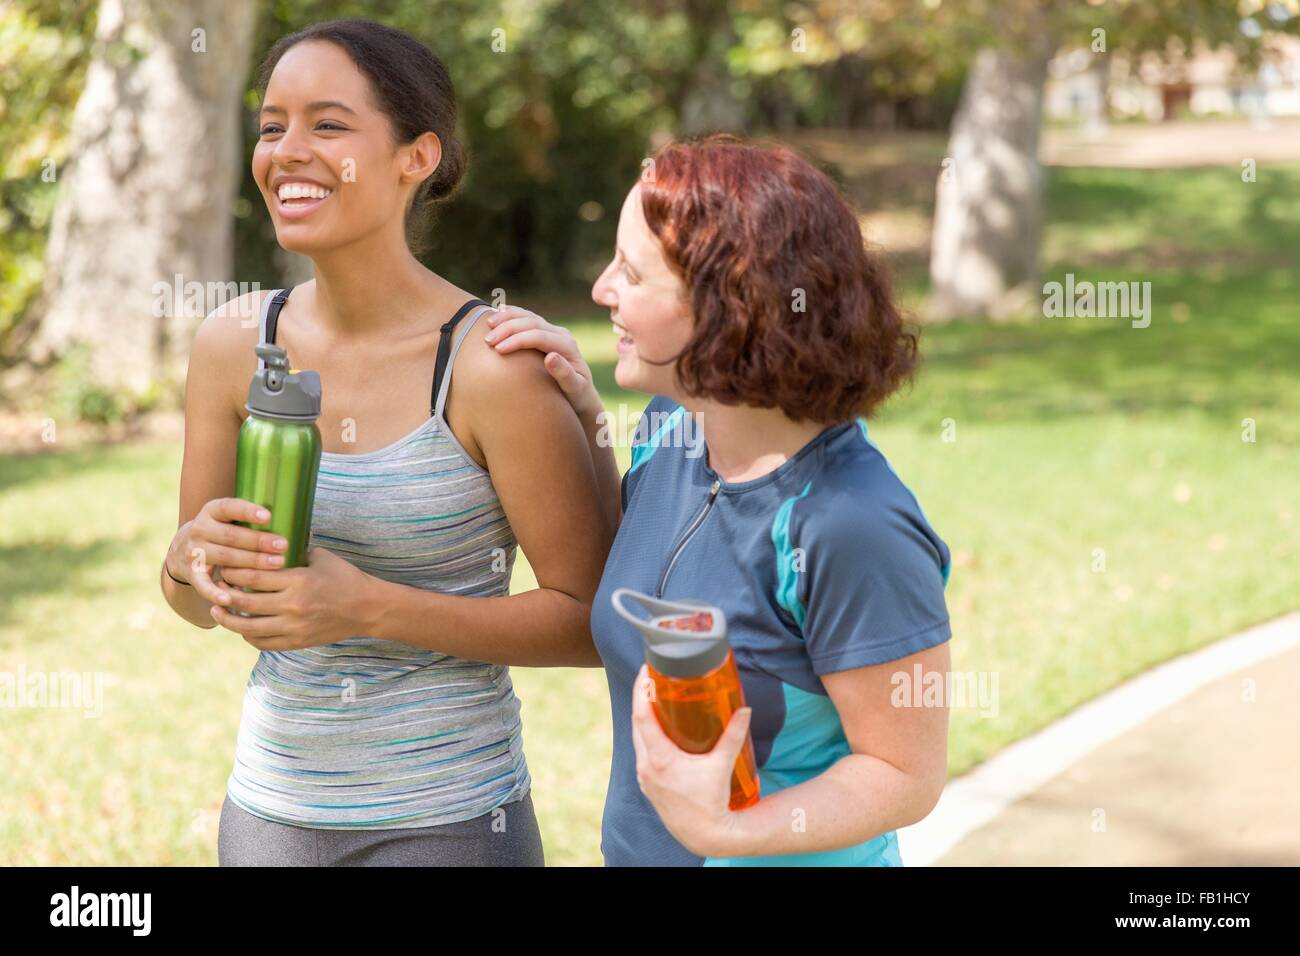 High angle view of young women out walking wearing sports clothing carrying water bottles smiling Stock Photo